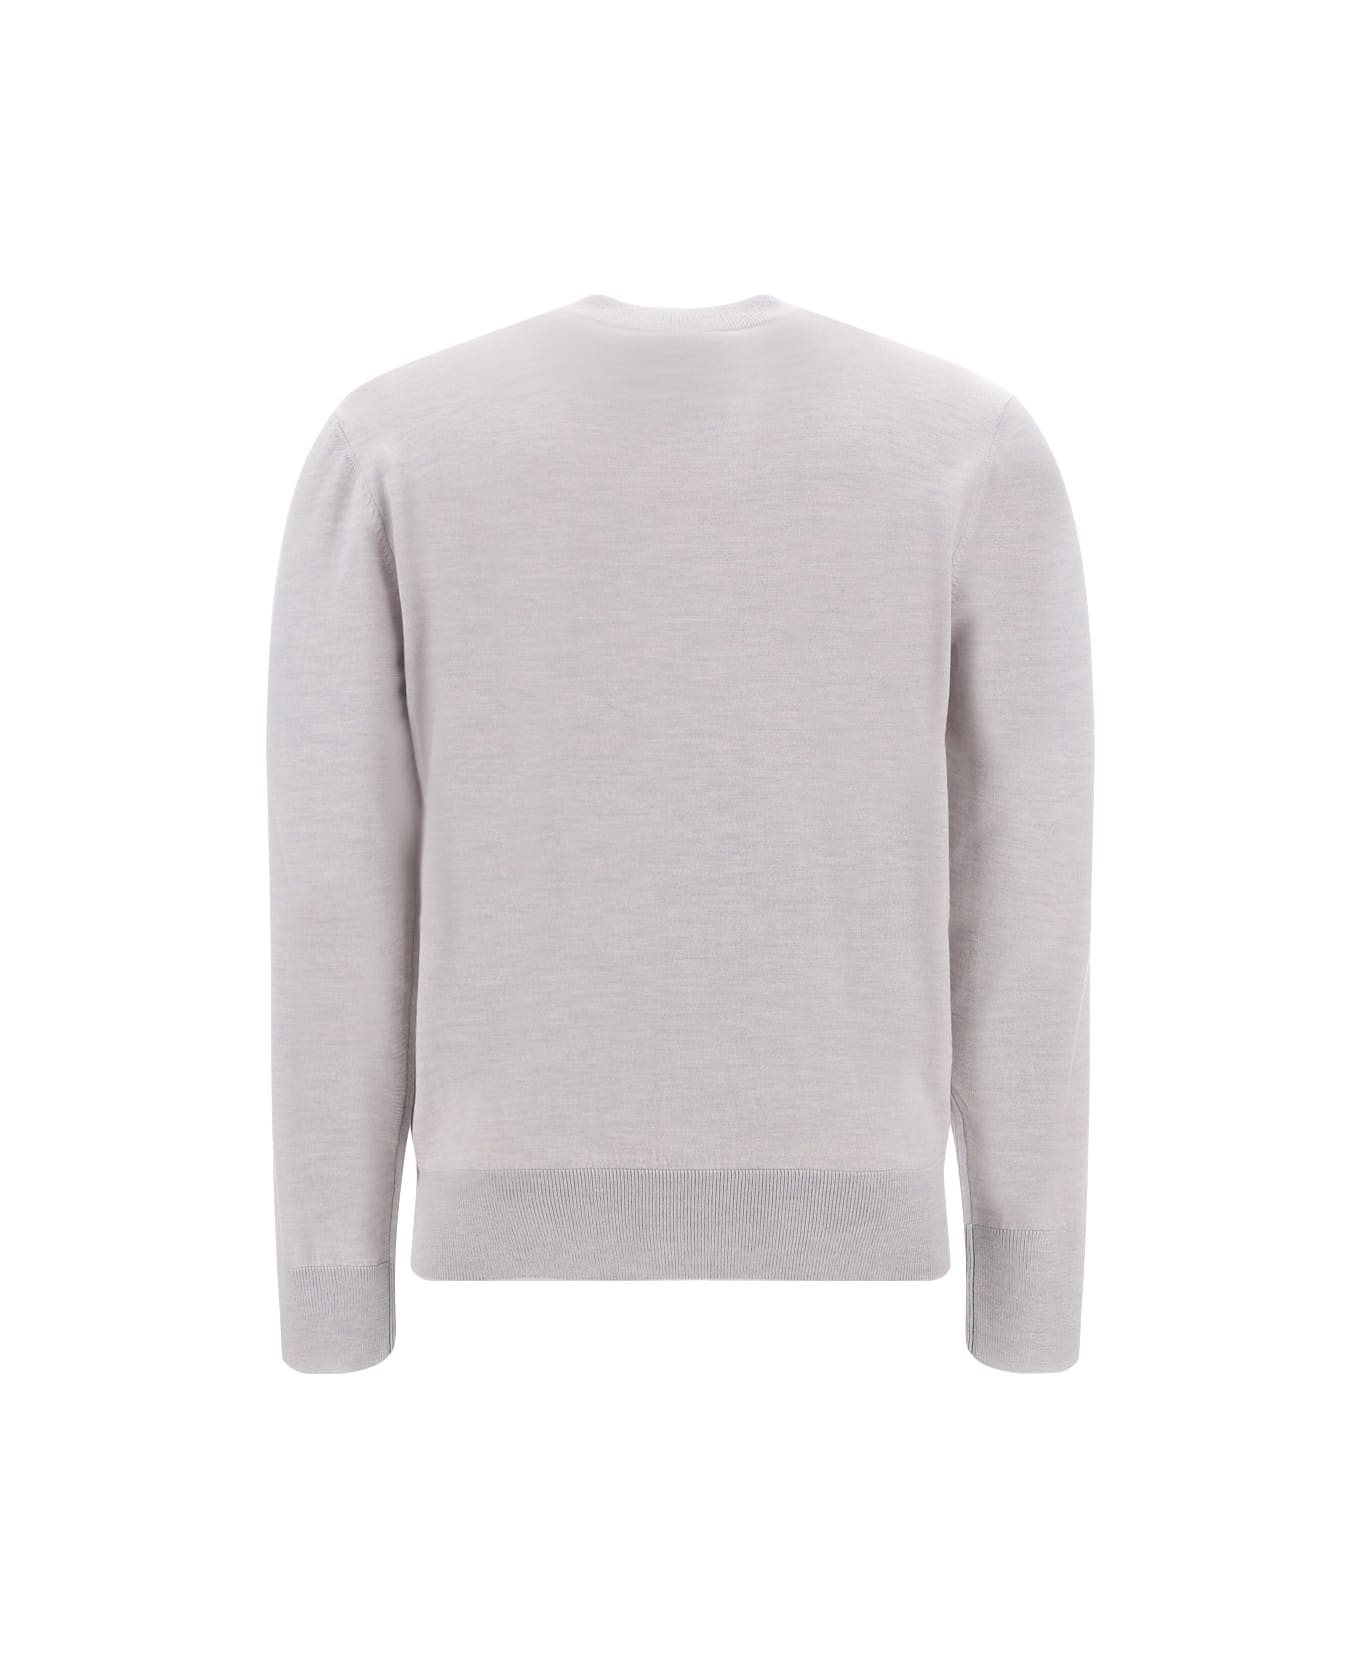 Givenchy Sweater - Cloud Grey